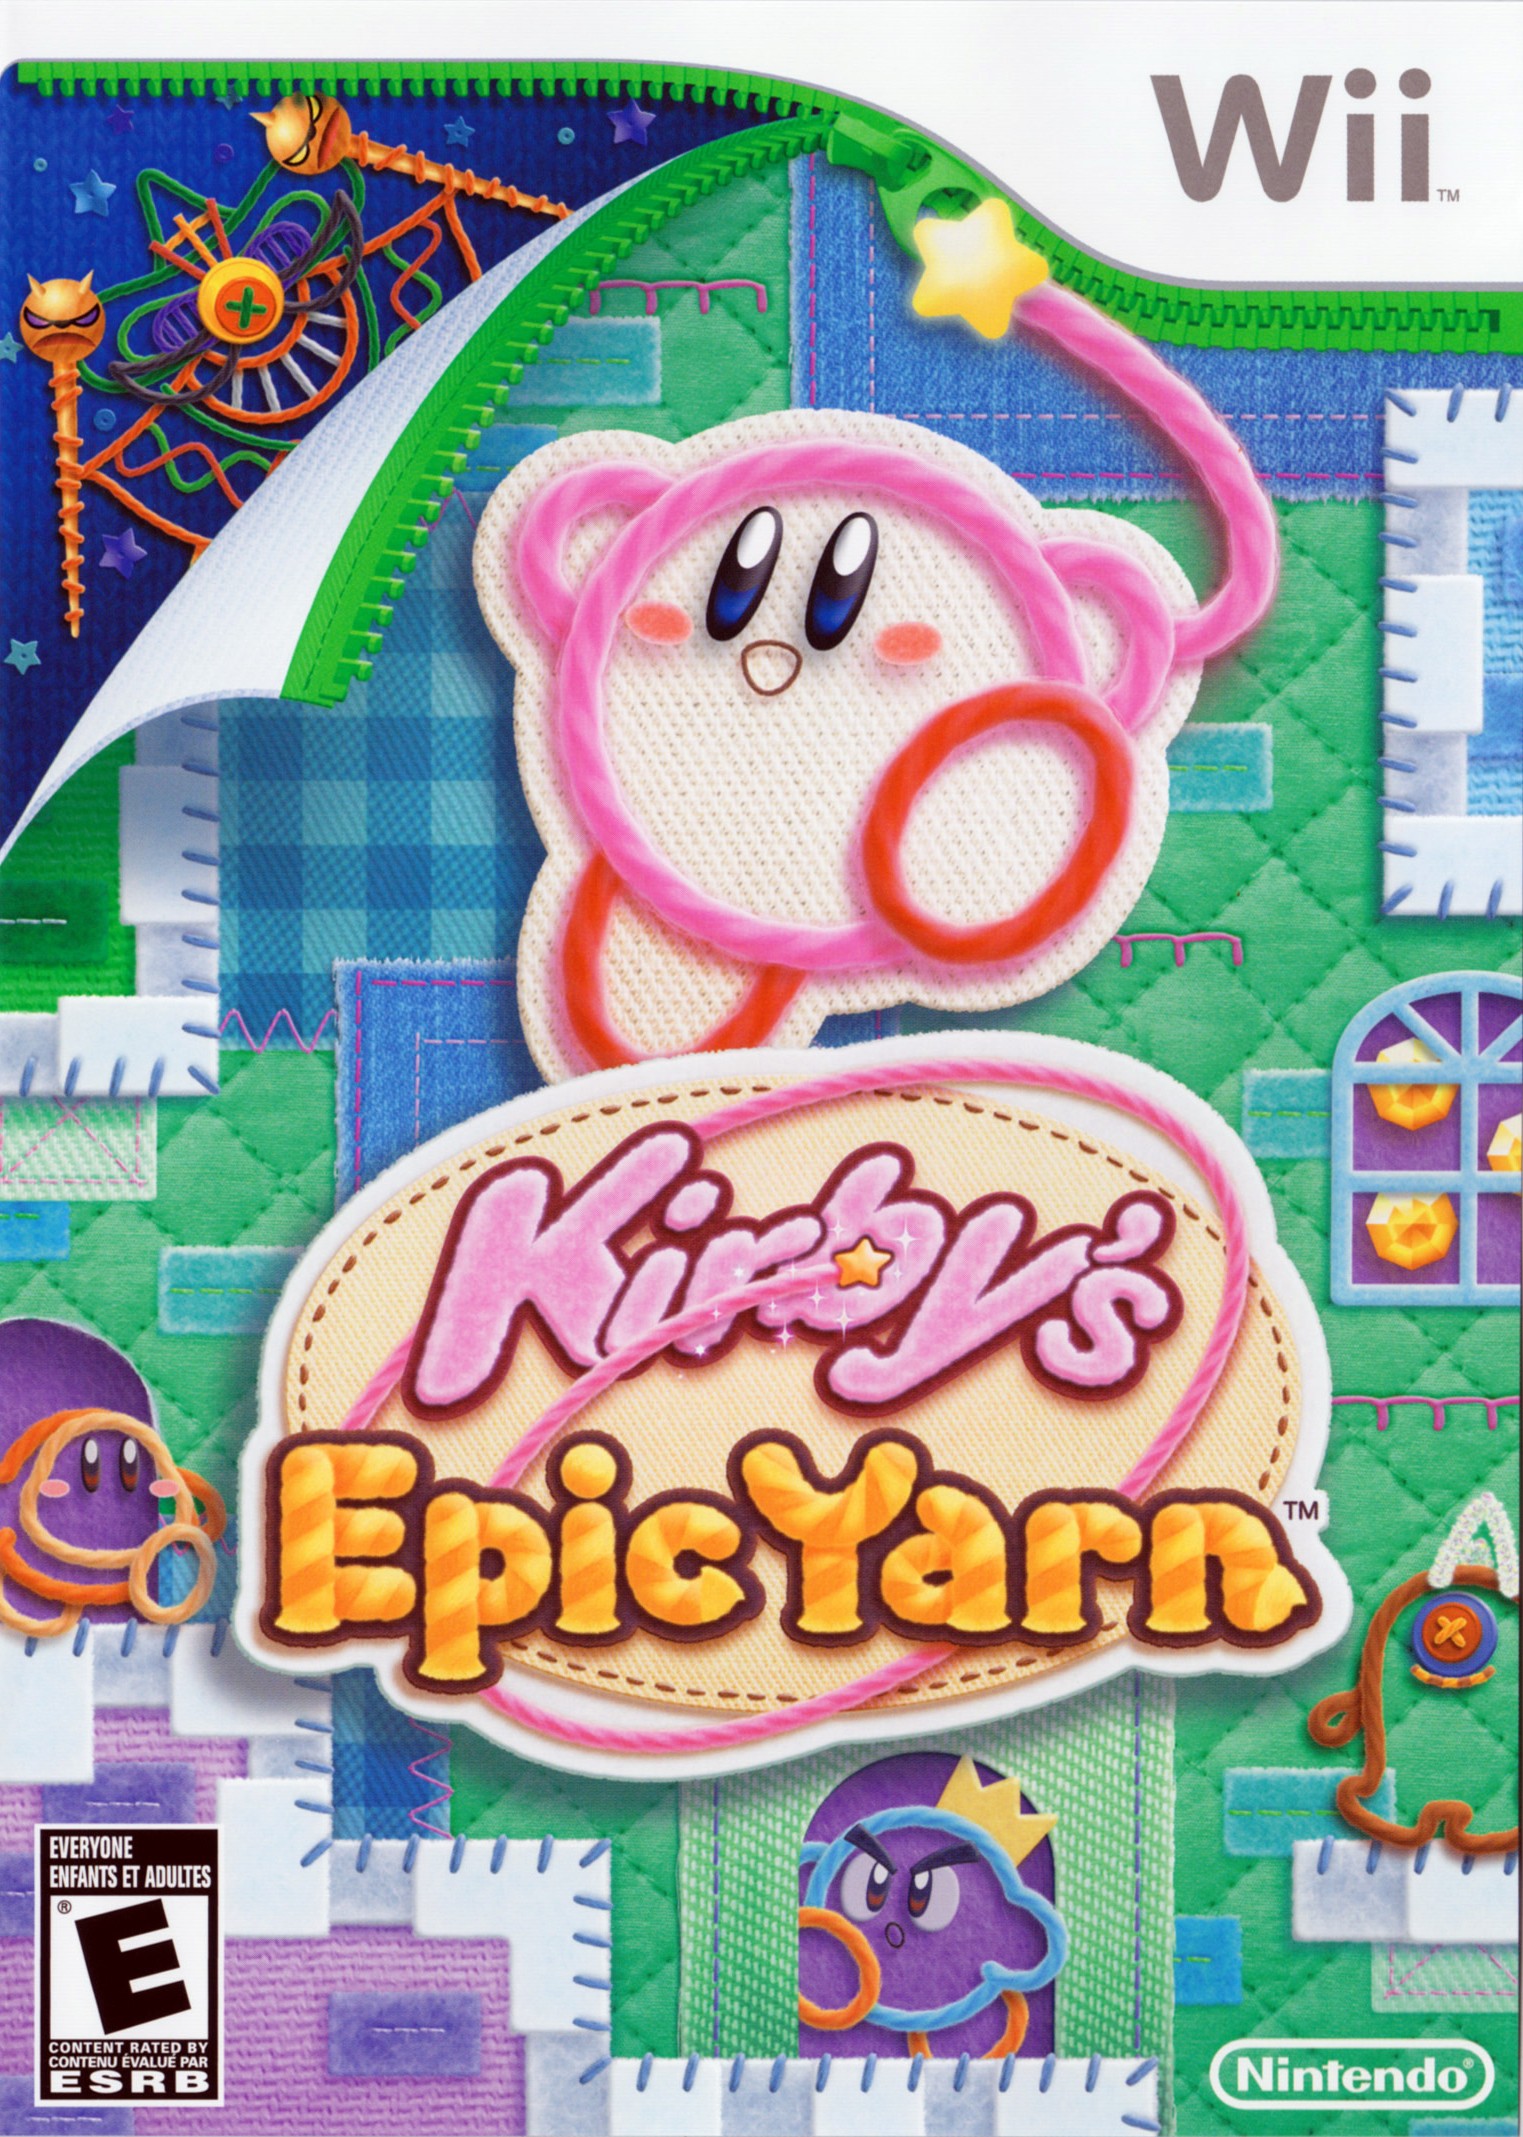 the box art for Kirby's Epic Yarn for the Wii. it feature's Kirby, a round pink character, but made of yarn. behind him is a castle made of patchwork quilts. in the top left, the quilt is folded forward to reveal the evil sorcerer, Yin-Yarn, the villain who banished Kirby to Patch Land